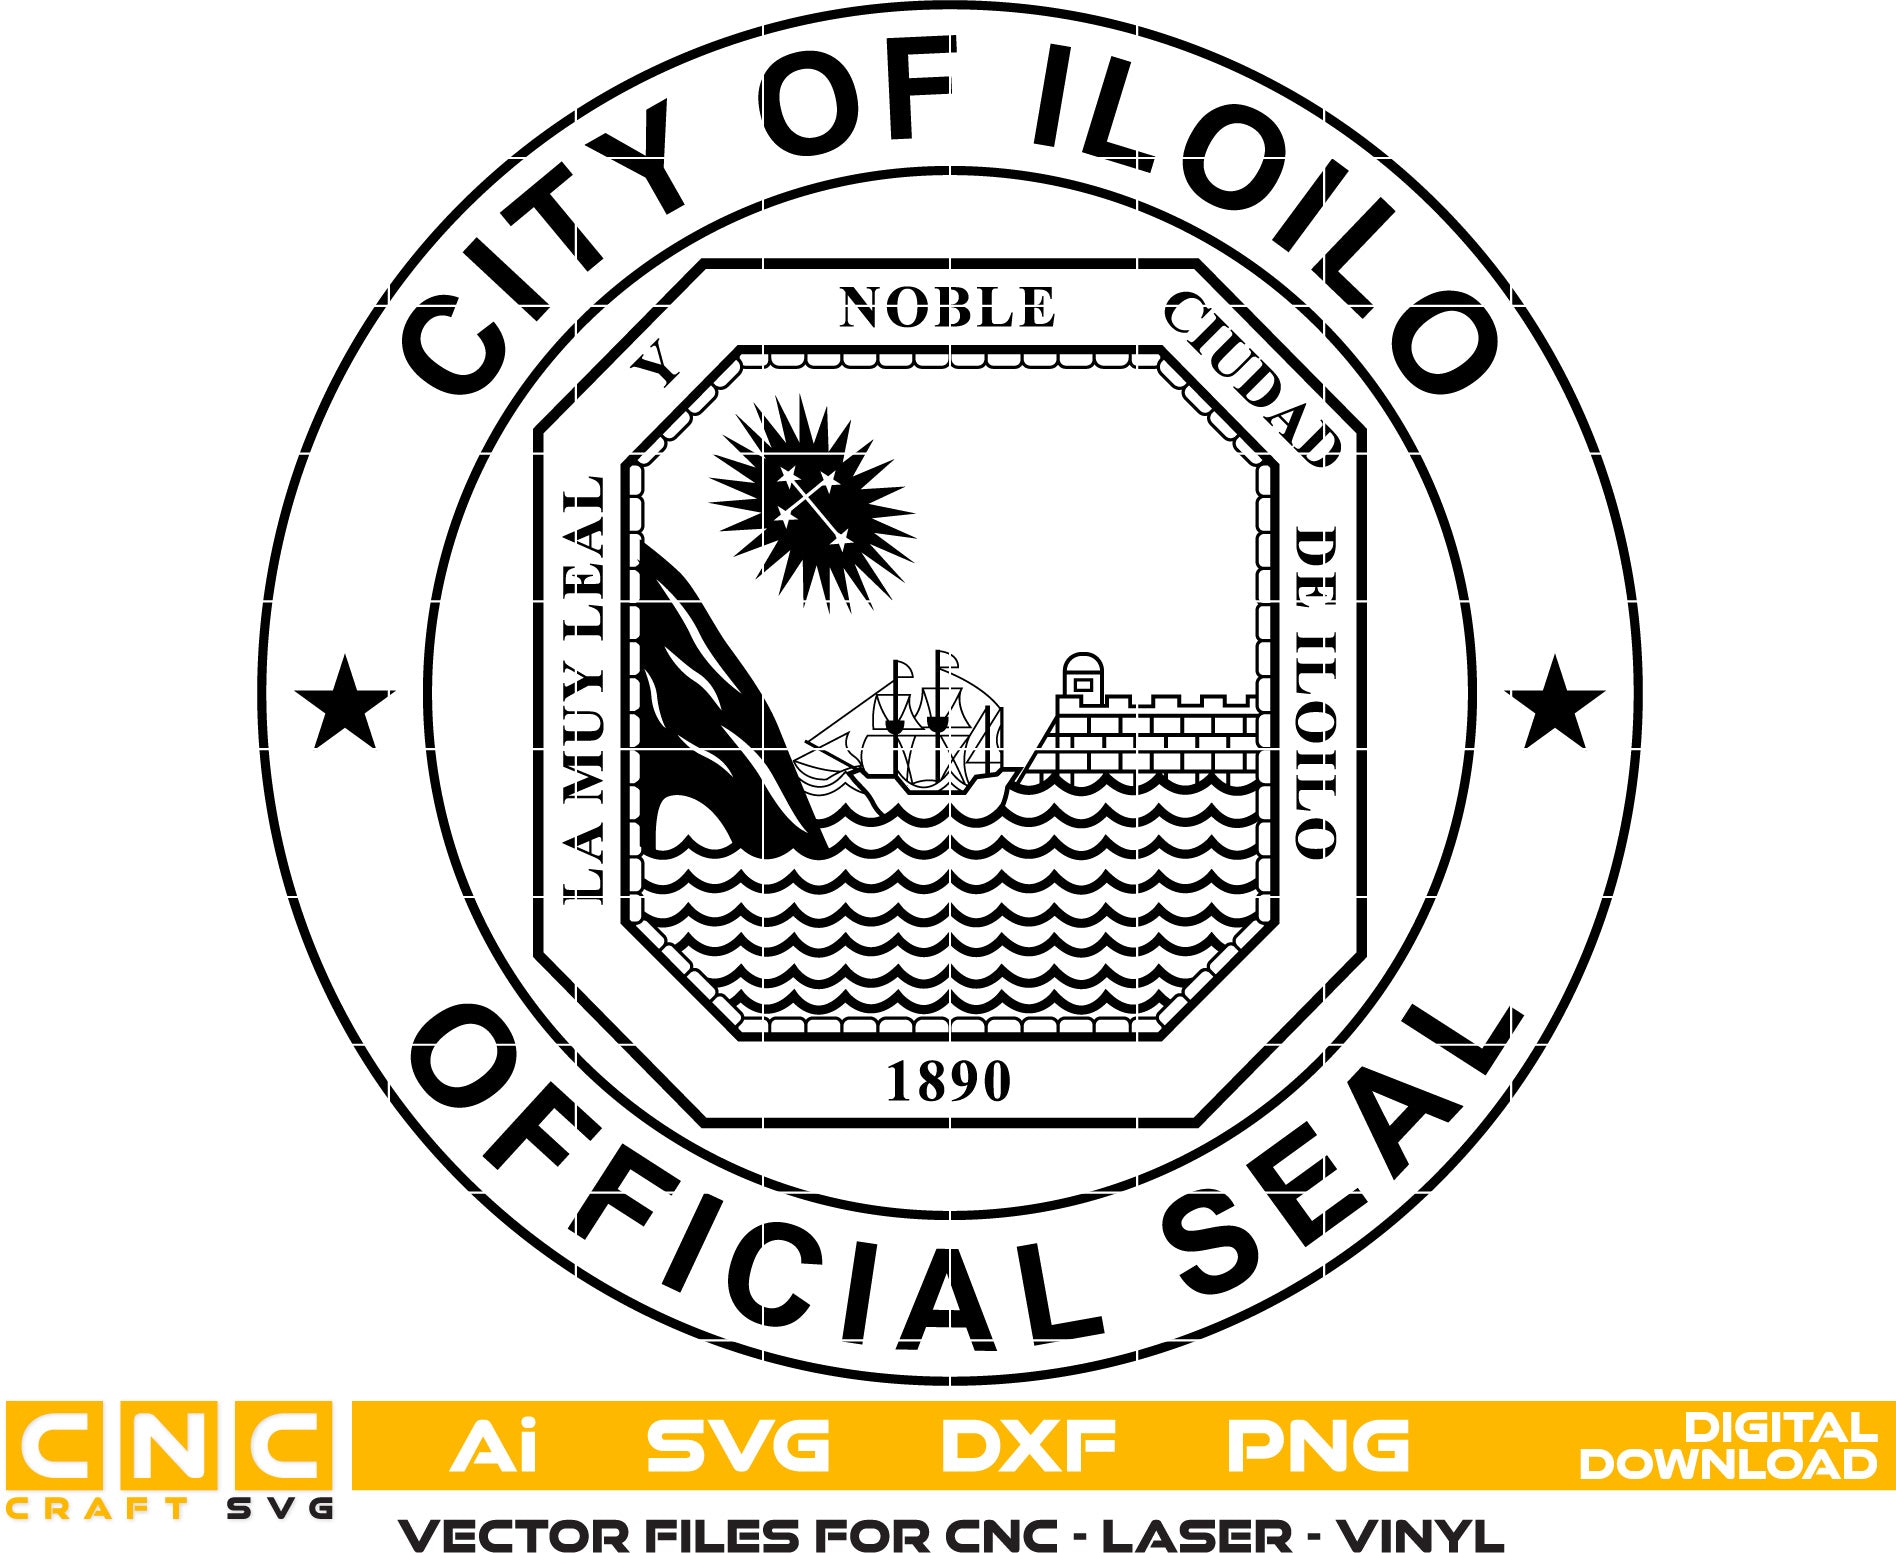 City of Iloilo Seal Vector Art, Ai,SVG, DXF, PNG, Digital Files for Laser Engraving, Woodworking & Printing